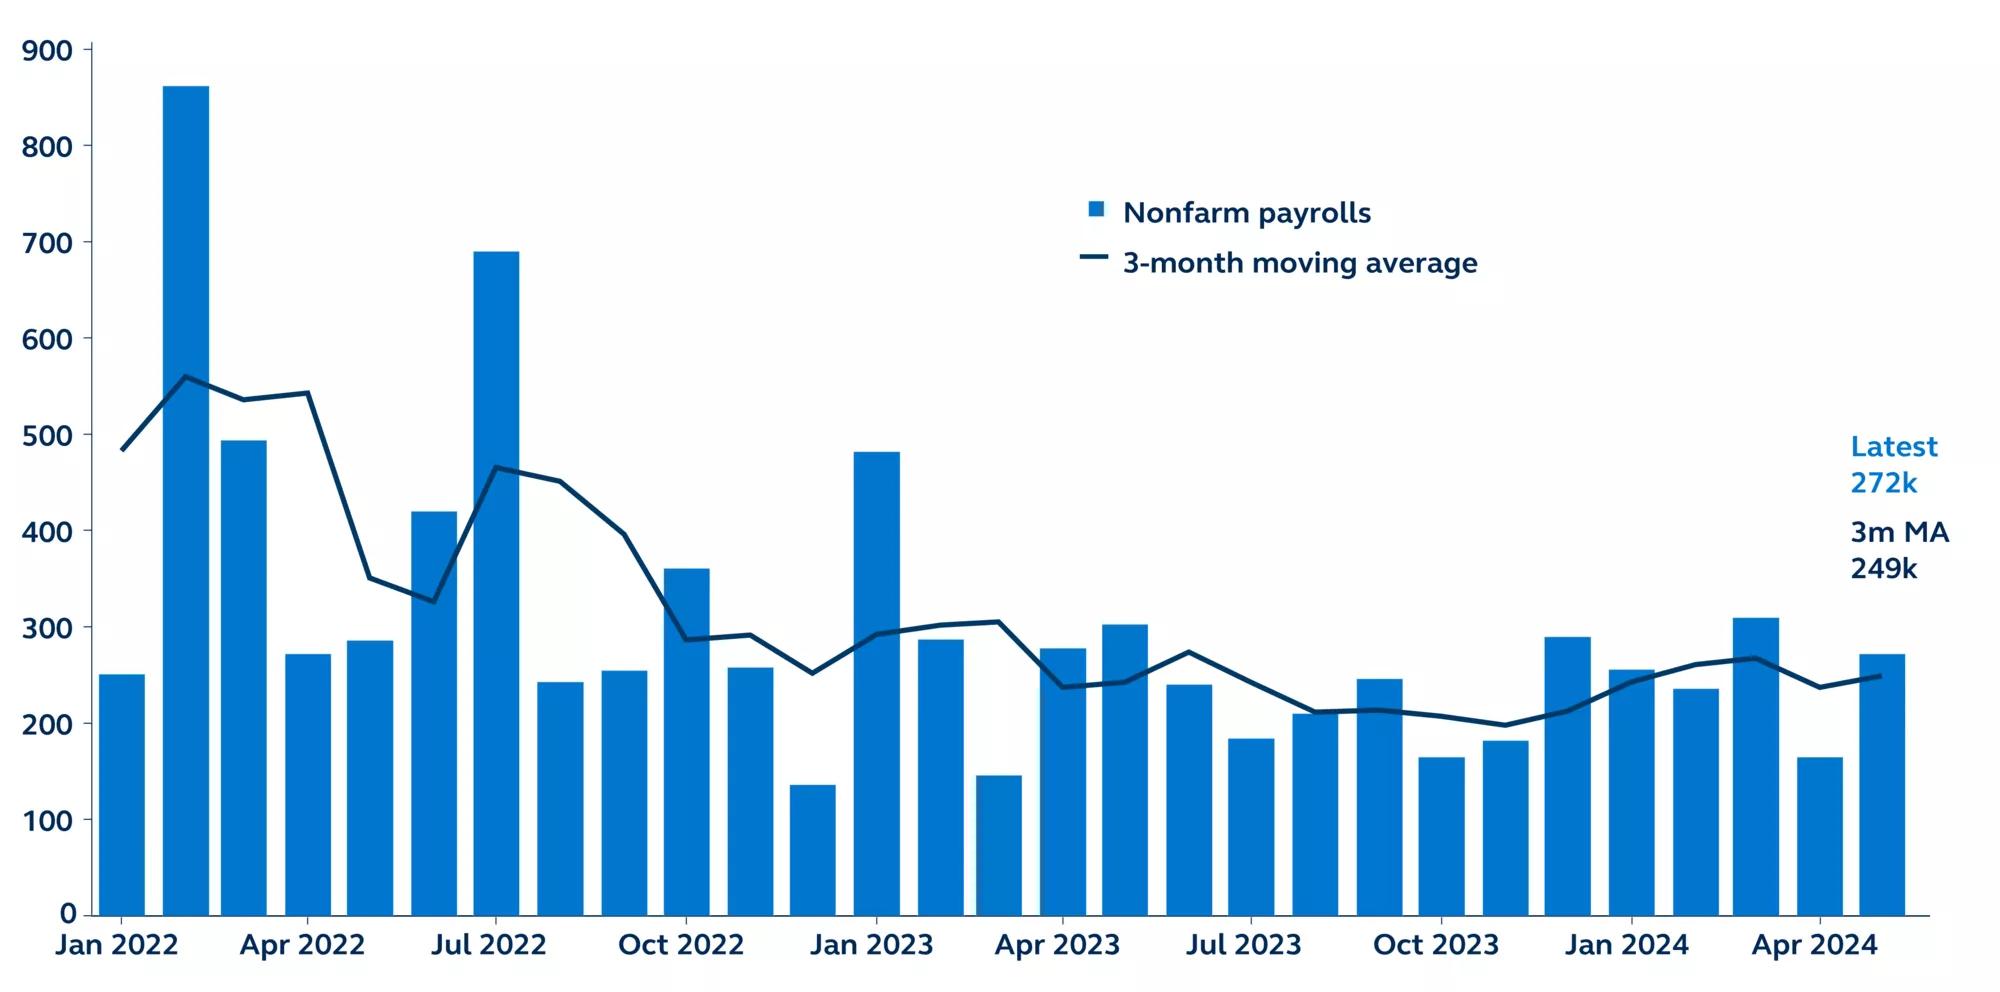 Monthly nonfarm payrolls and 3-month moving average since 2022.